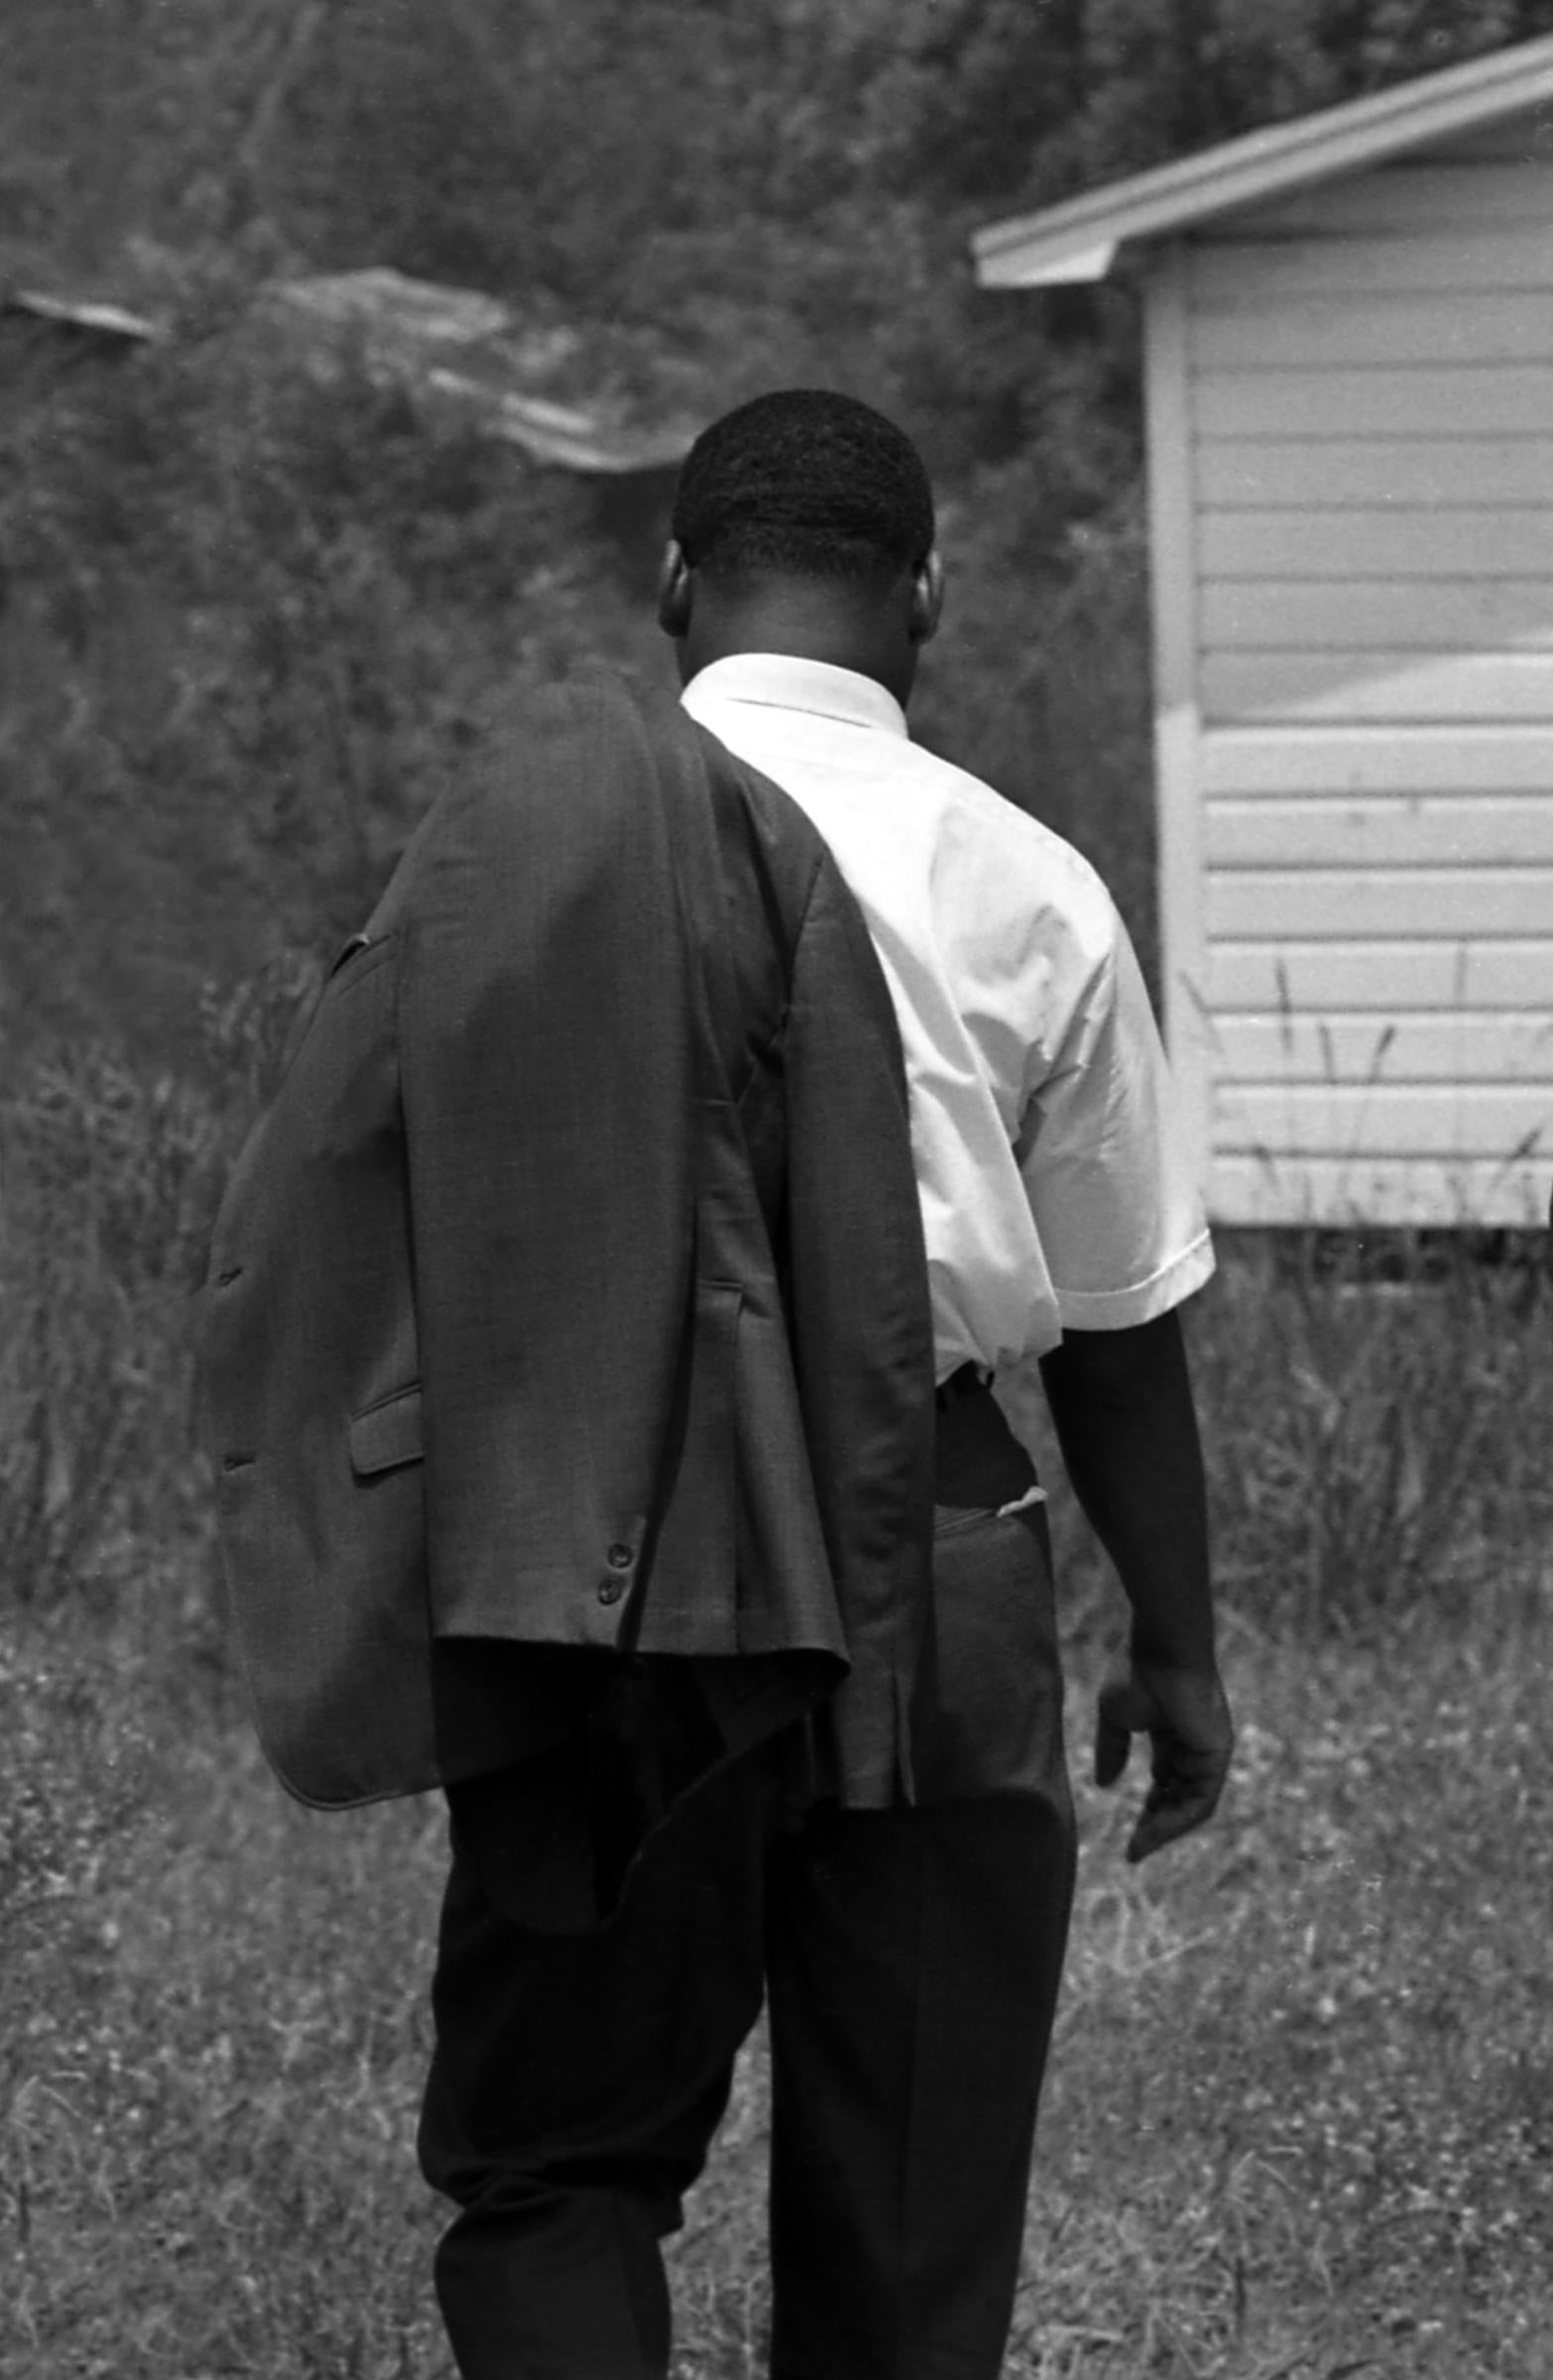 Martin Luther King Jr., Mississippi - Photograph by Harry Benson